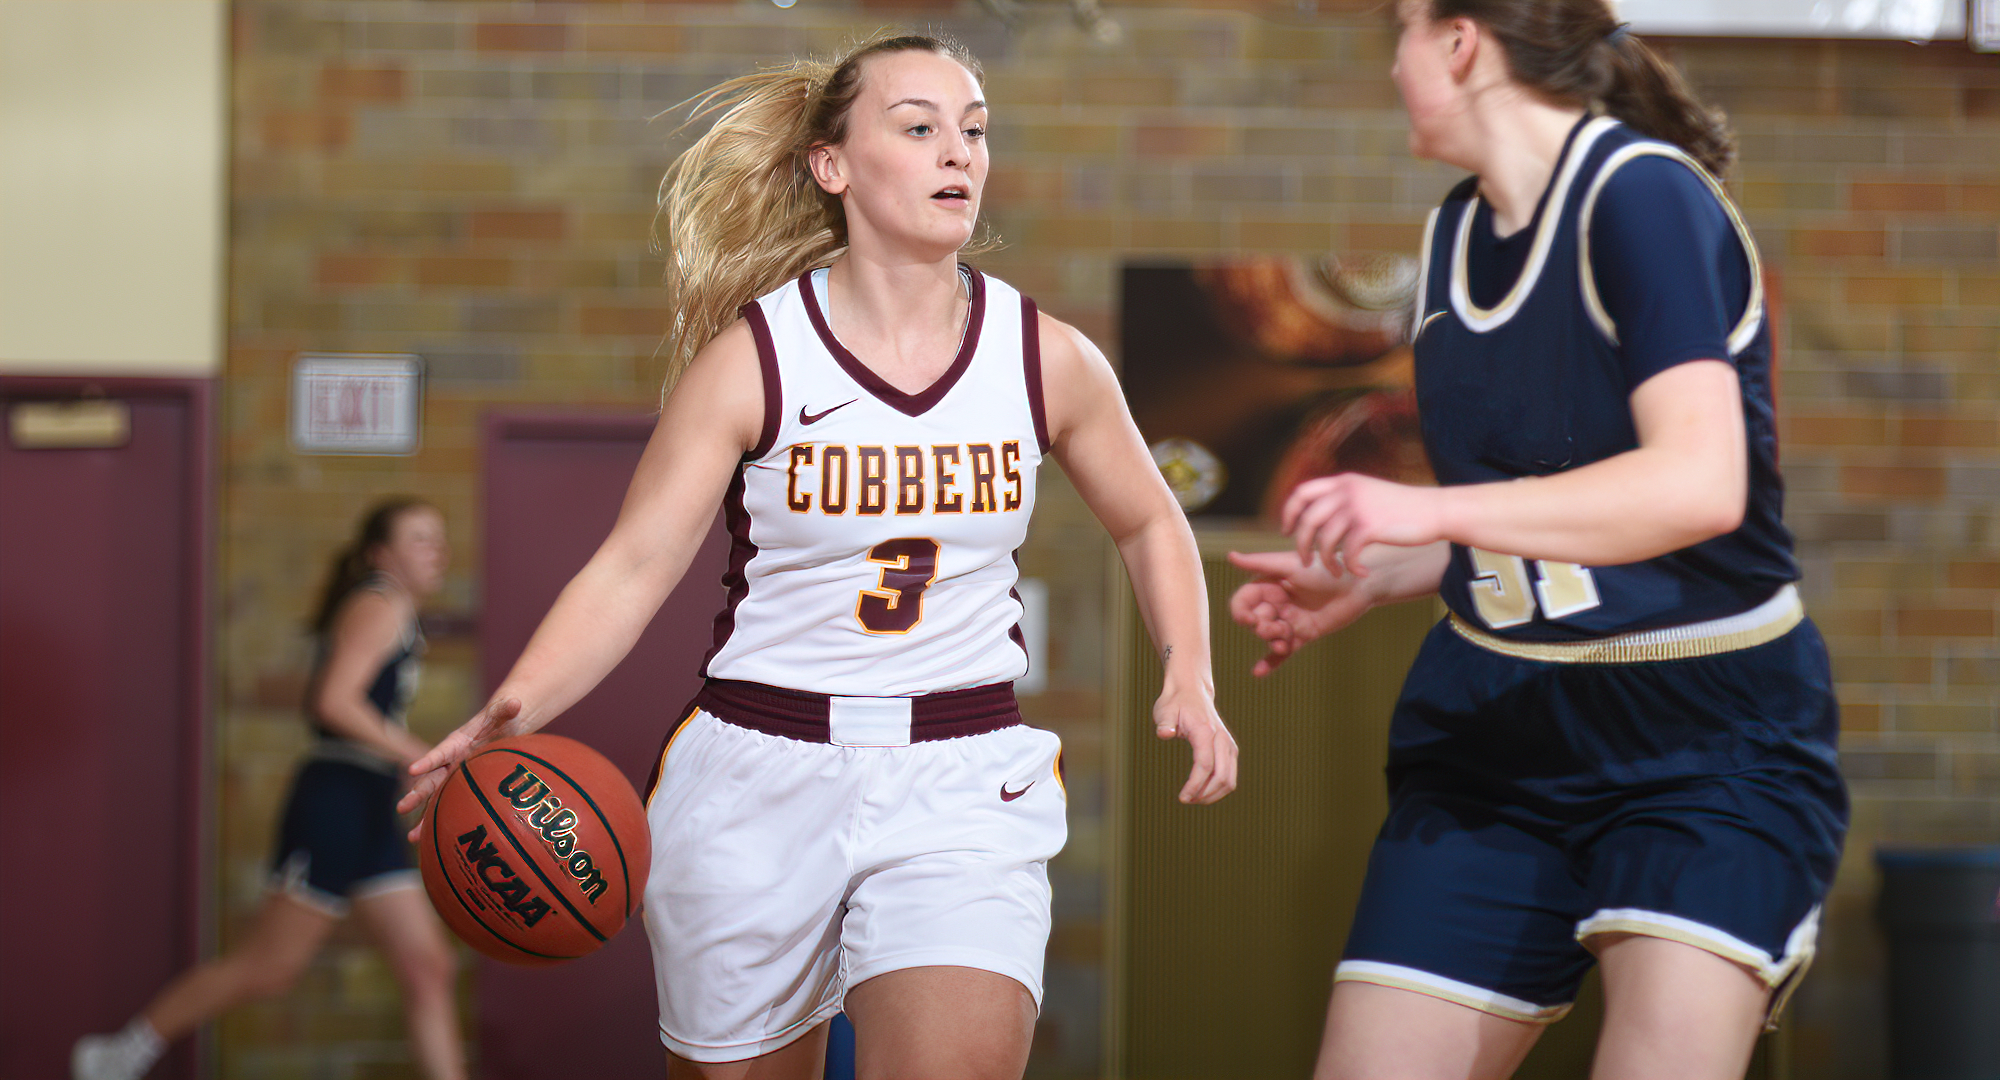 Senior Autumn Thompson had a game-high 21 points and added four rebounds and three assists in the Cobbers' season opener at UM-Morris.